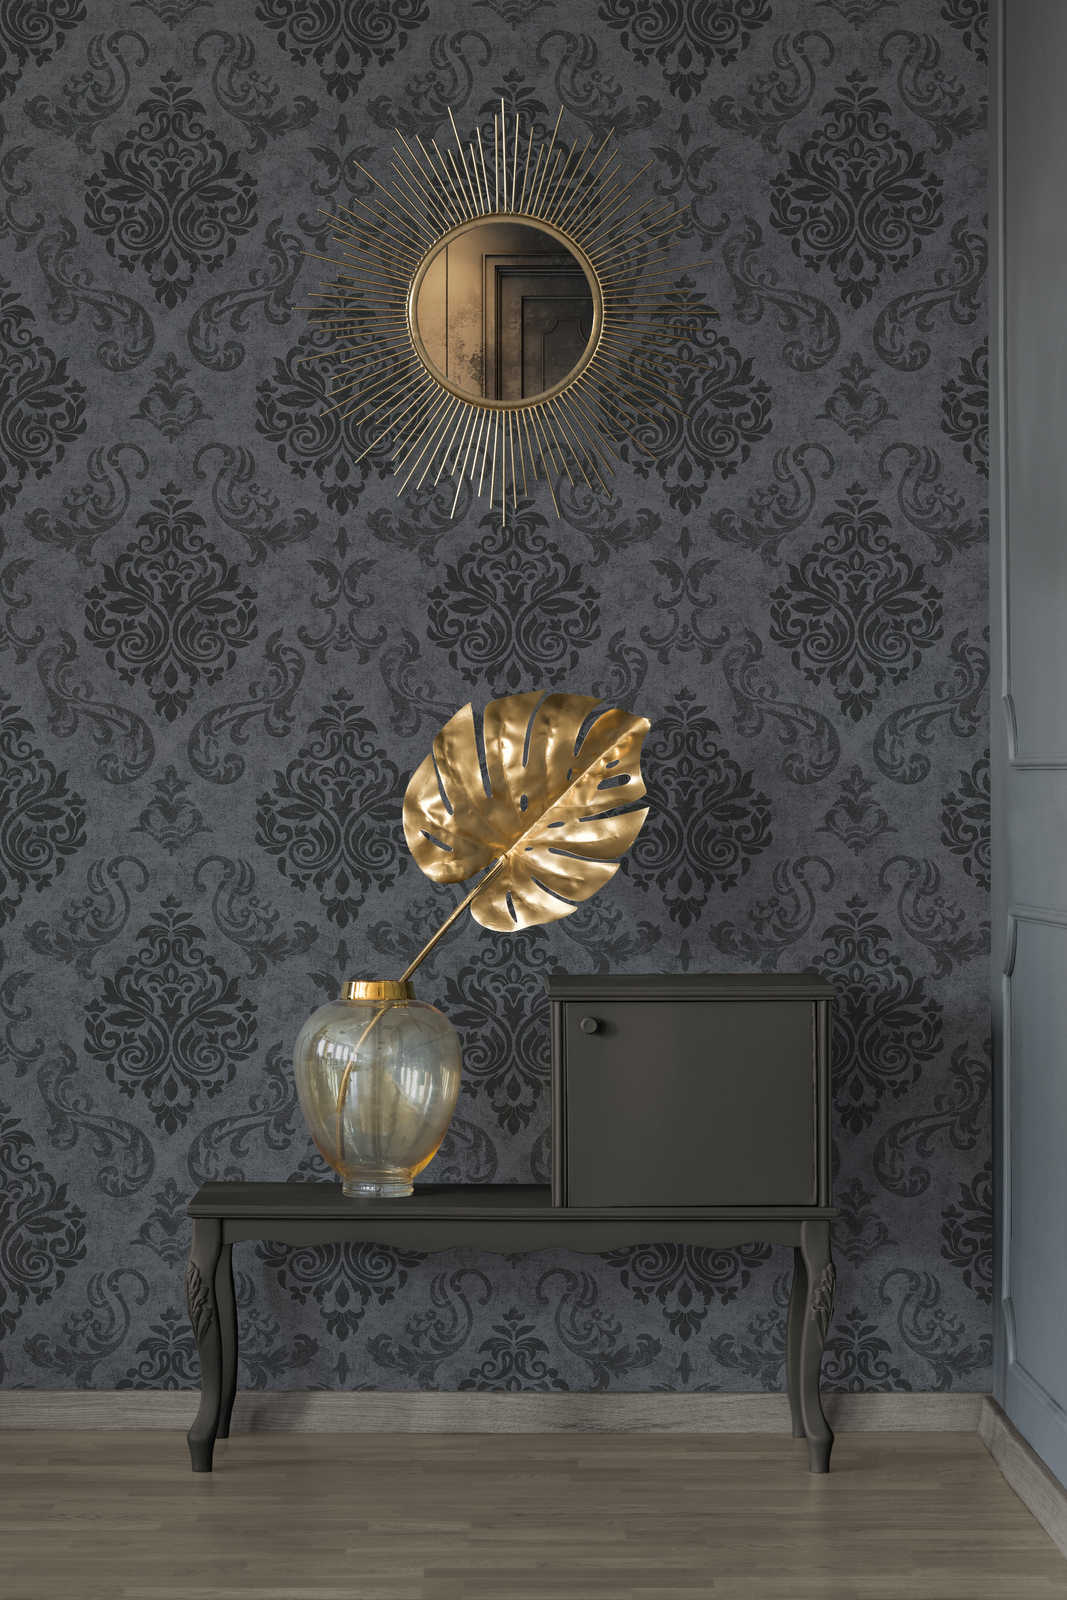             Ornaments wallpaper baroque style with glitter effect - grey, metallic, black
        